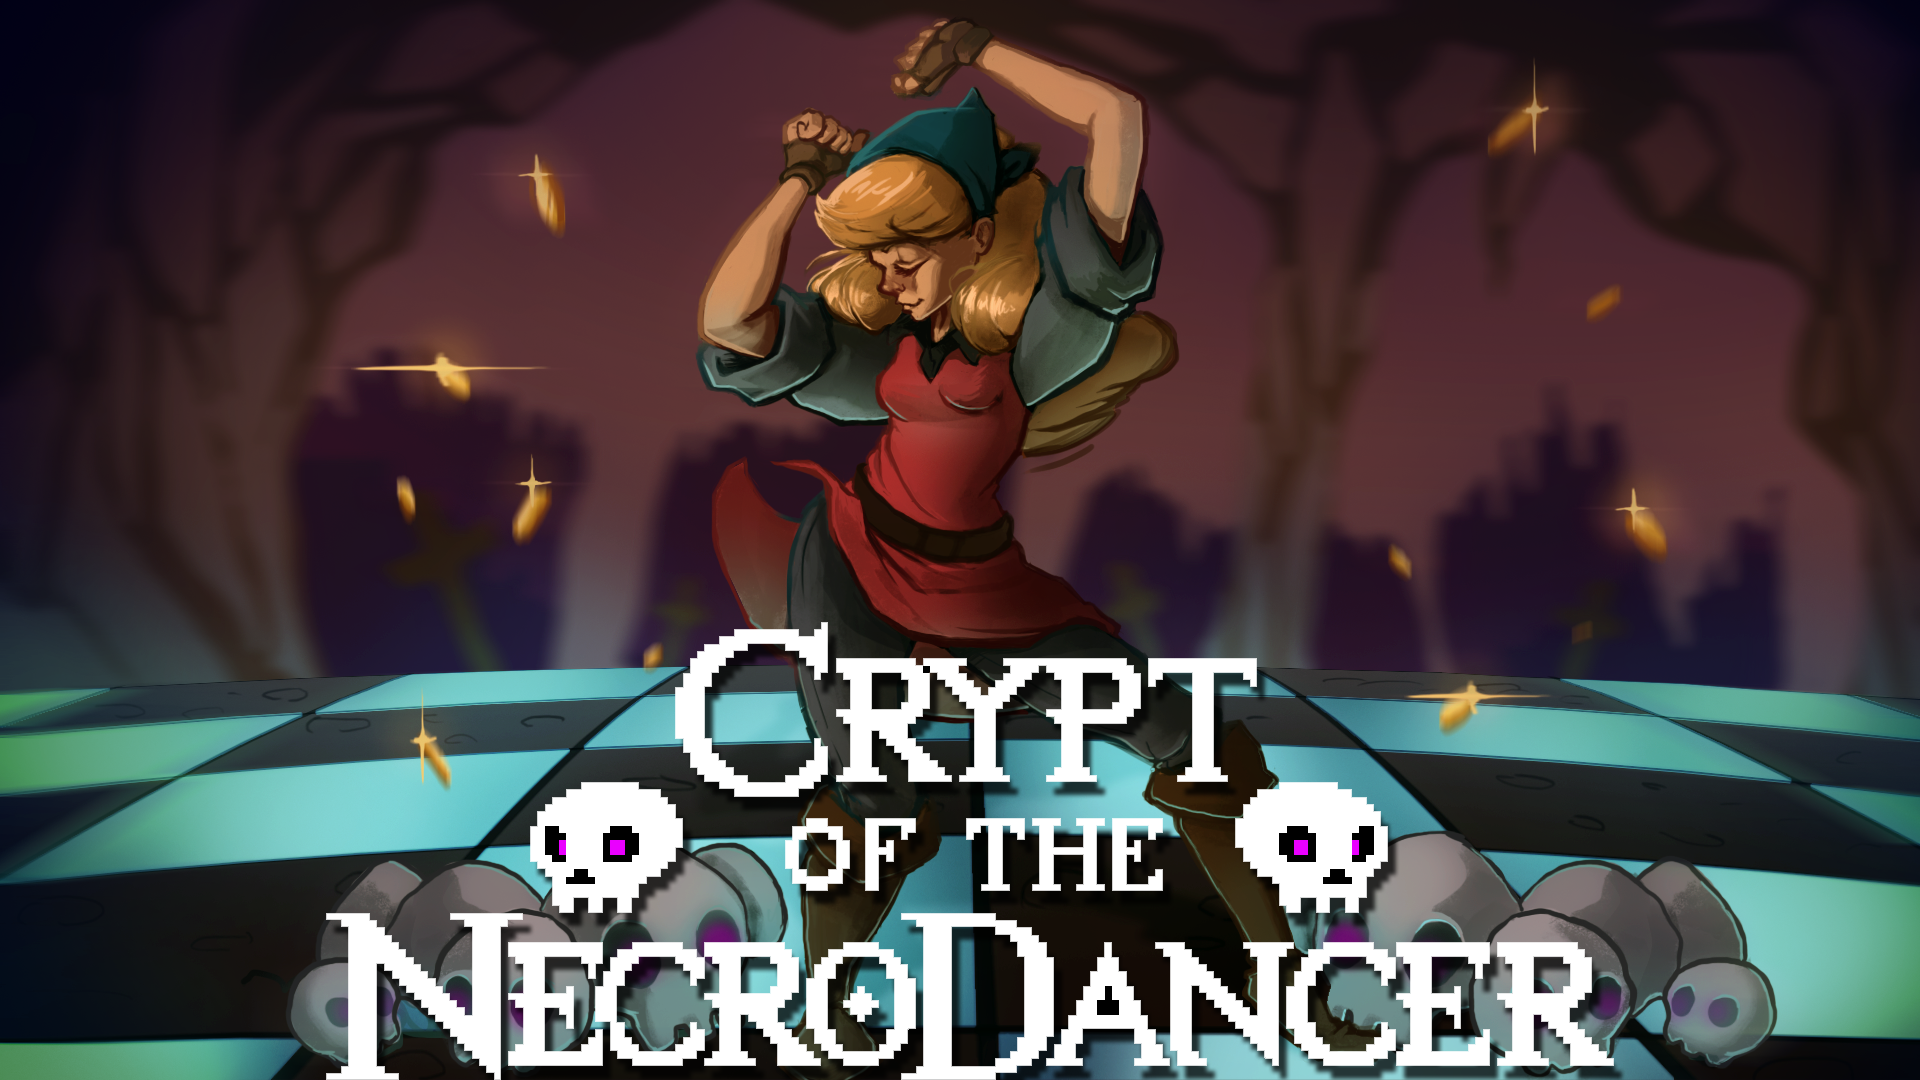 Dance On Their Graves by CartoonCoffee on Newgrounds